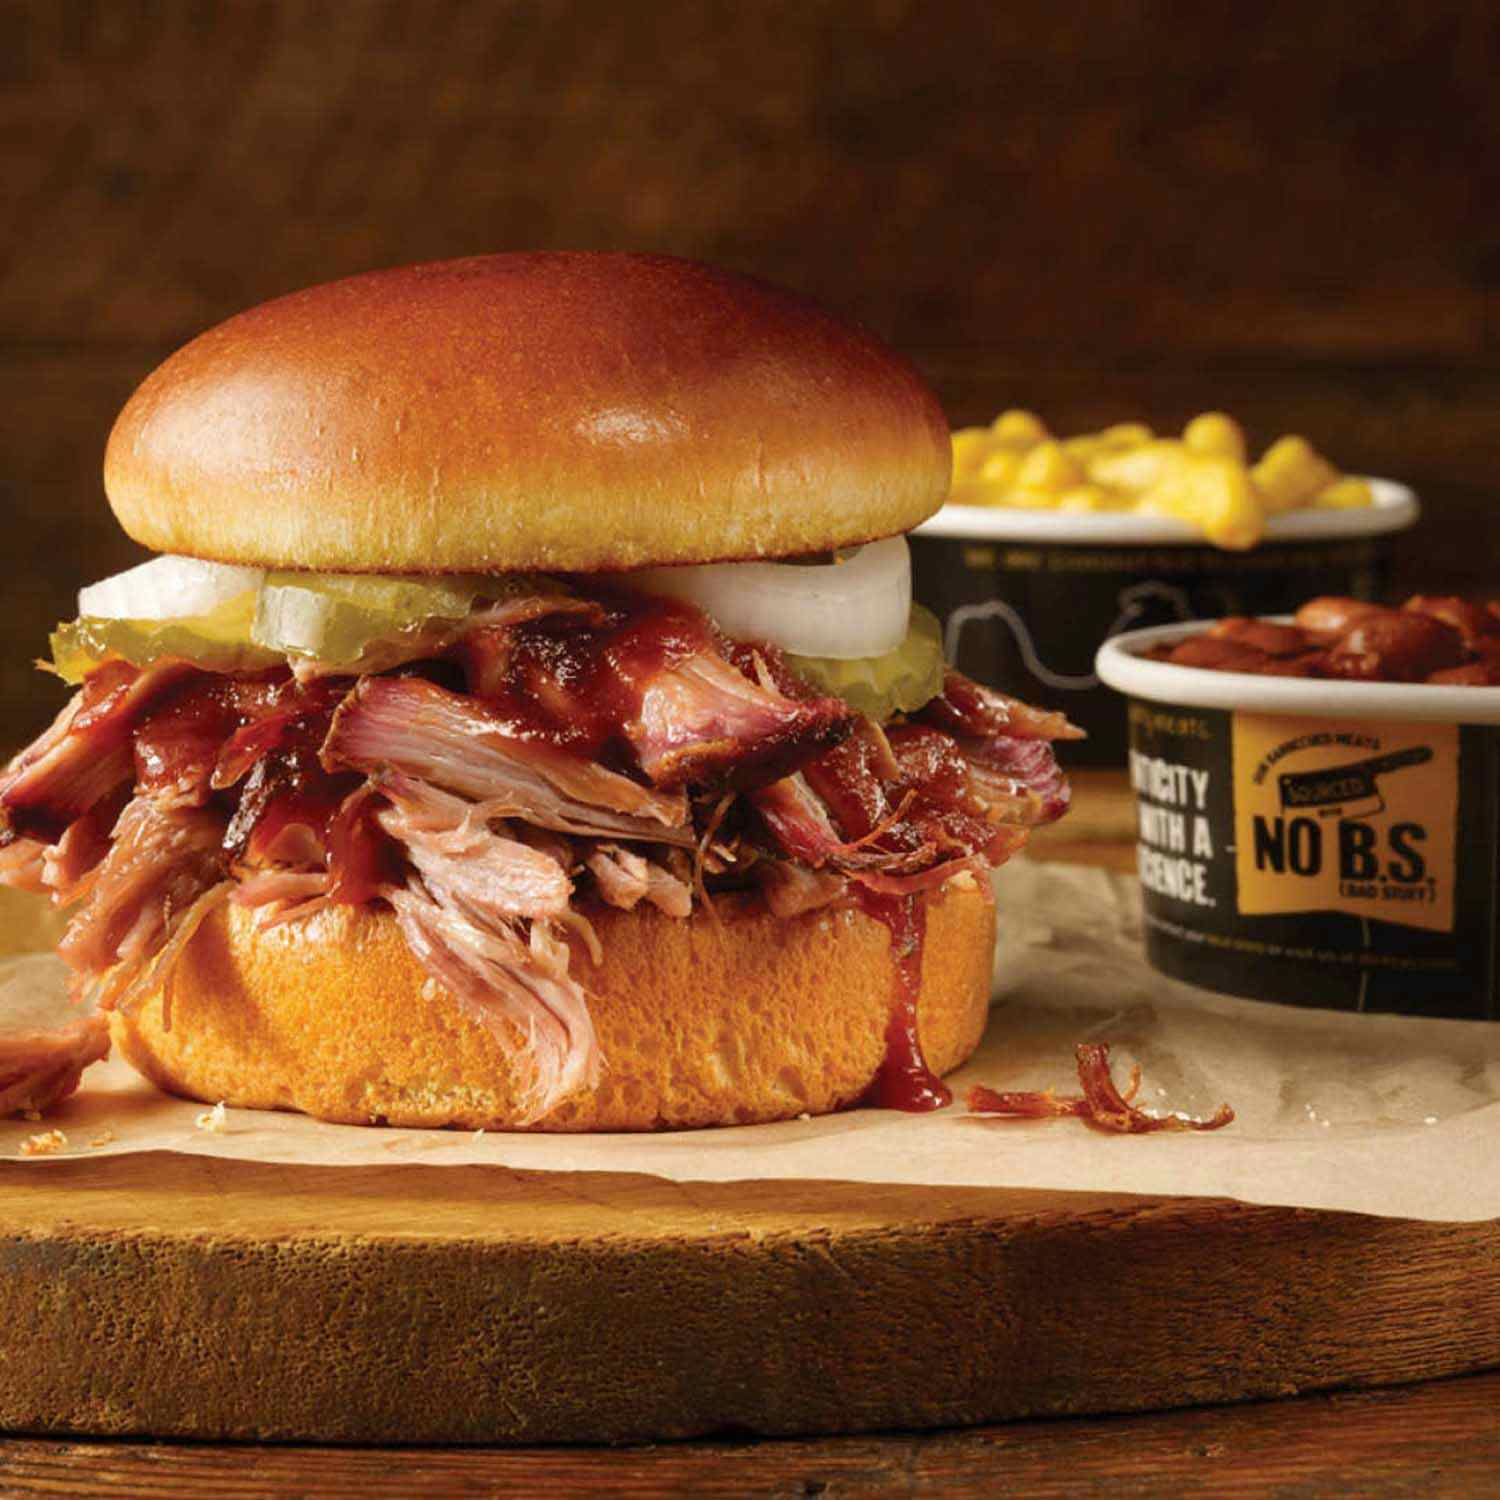 Franchising.com:  Local Restaurateurs Bring Dickey’s Barbecue Pit to Bowie, TX